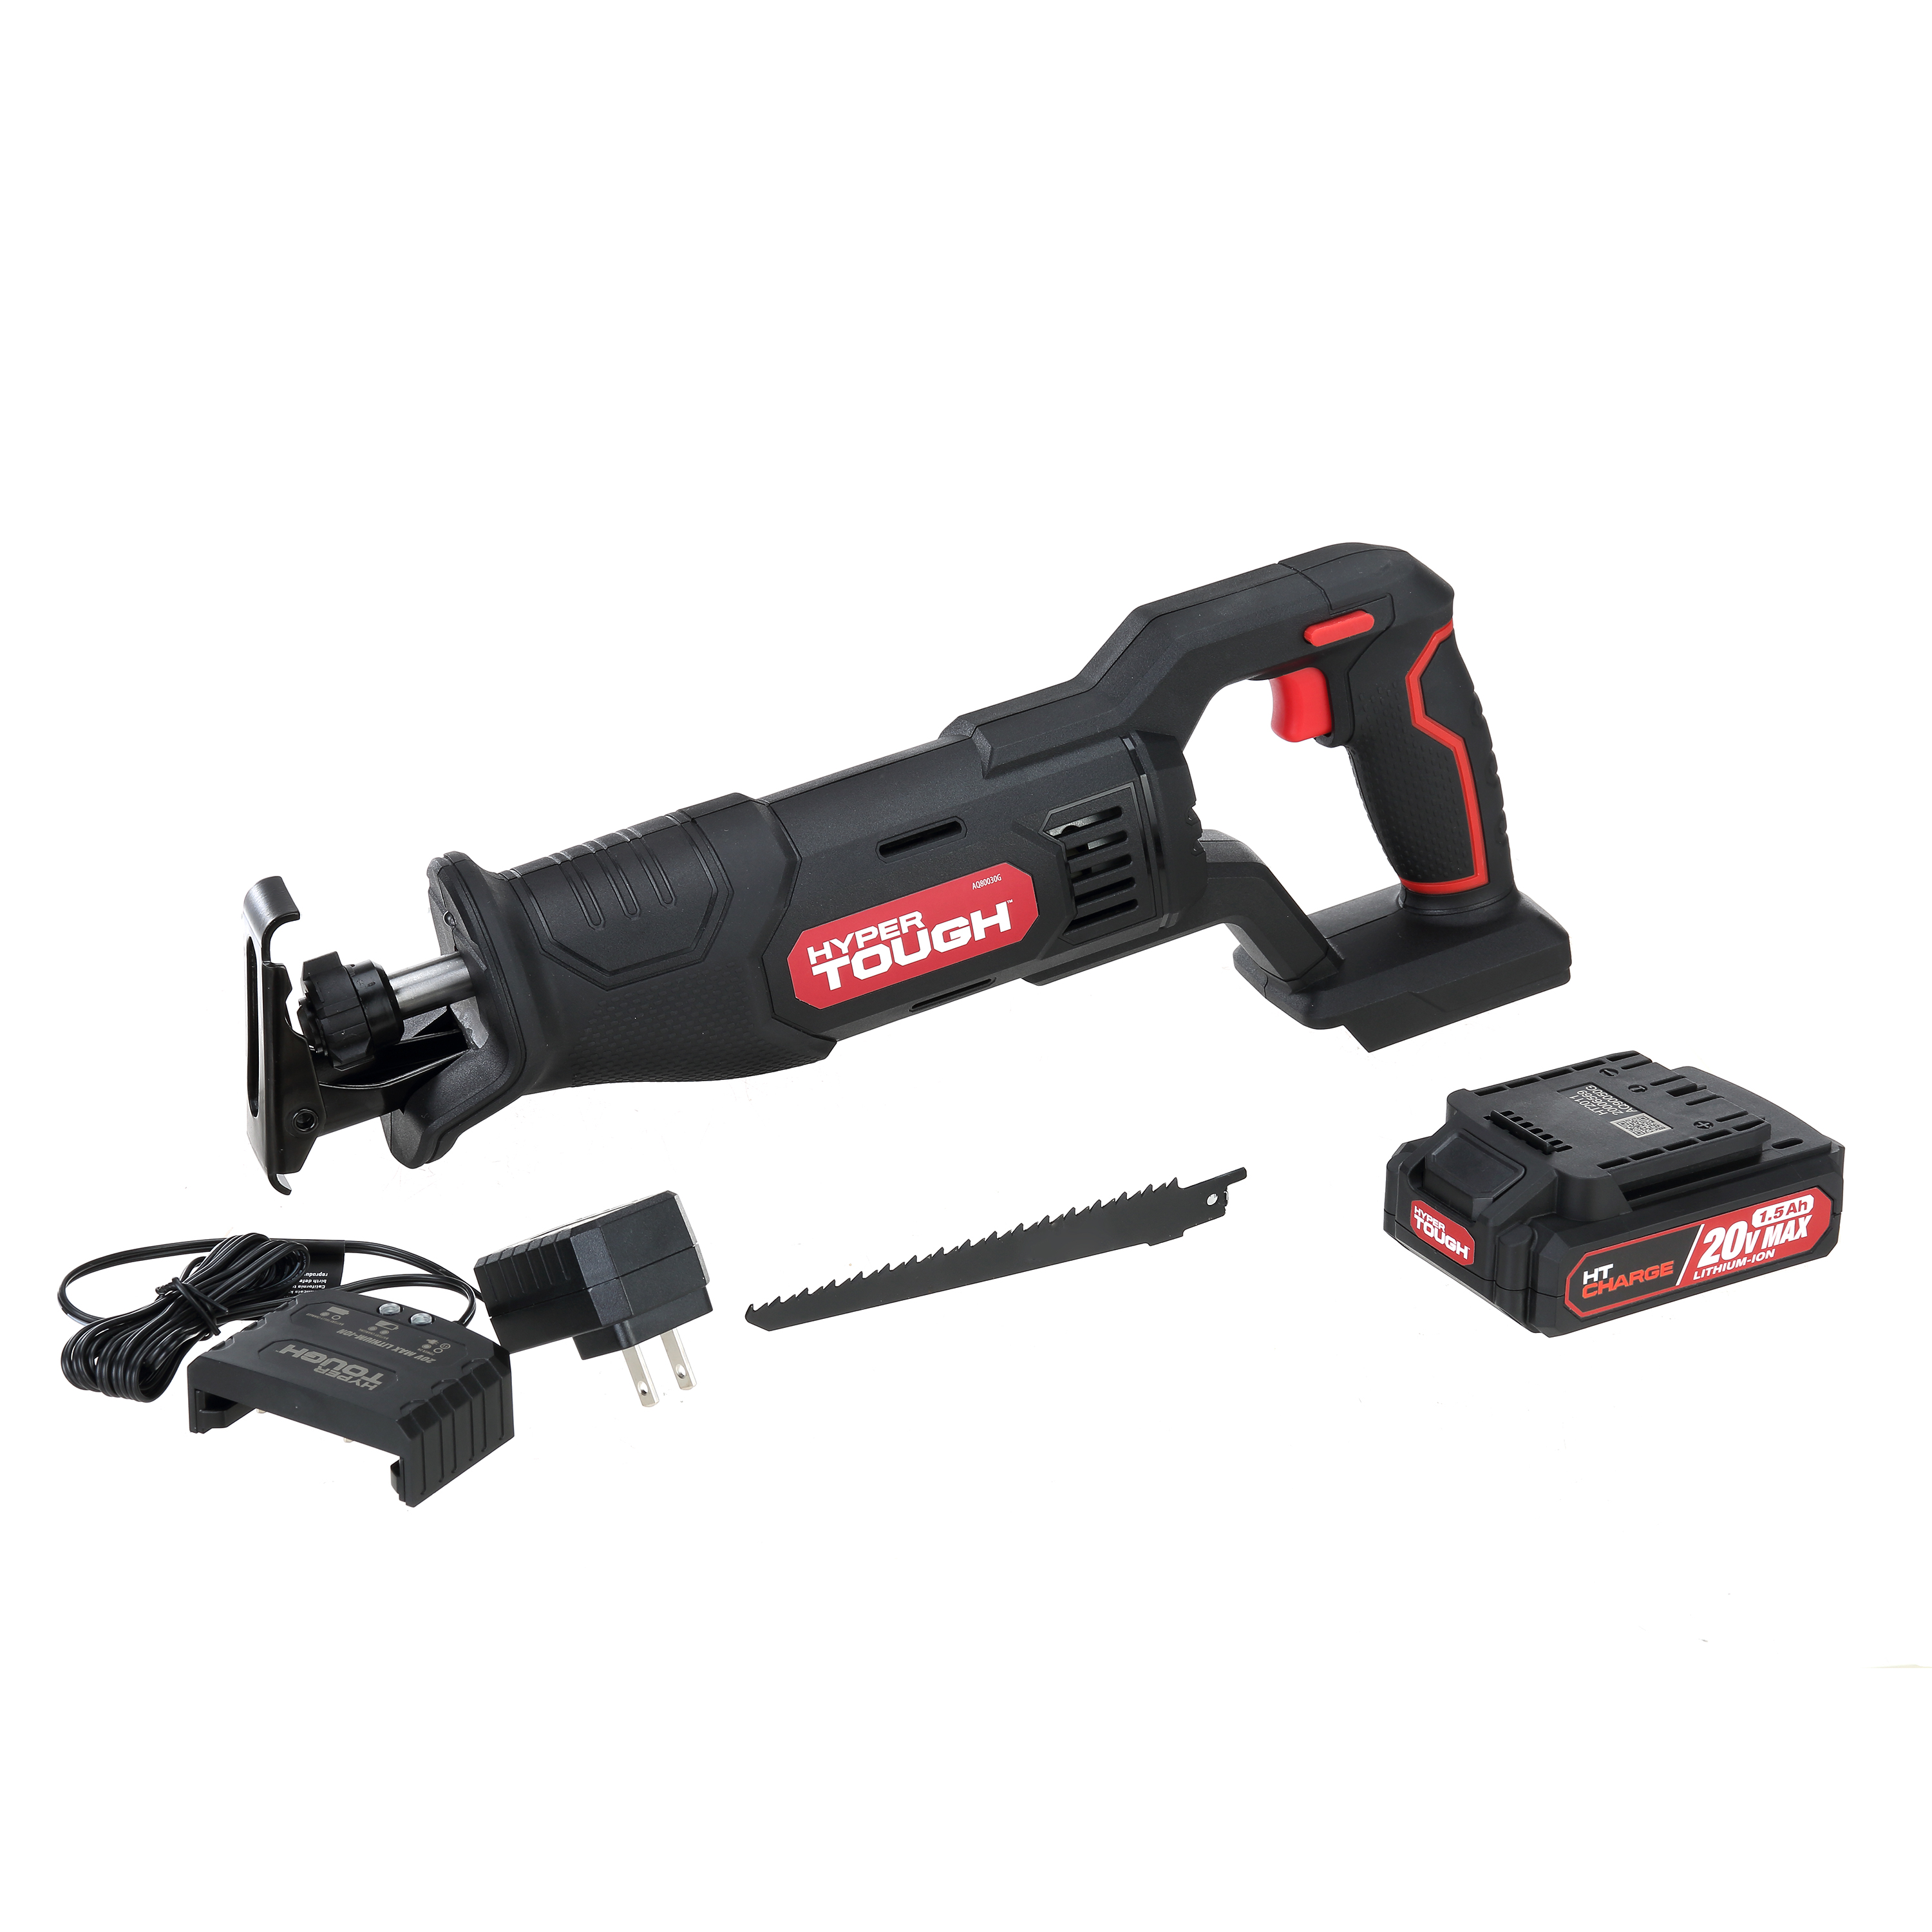 Hyper Tough 20V Max Lithium-ion Cordless Reciprocating Saw, Variable Speed, Keyless Blade Change, with 1.5Ah Lithium-Ion Battery and Charger, Wood Blade and LED Light - image 3 of 28